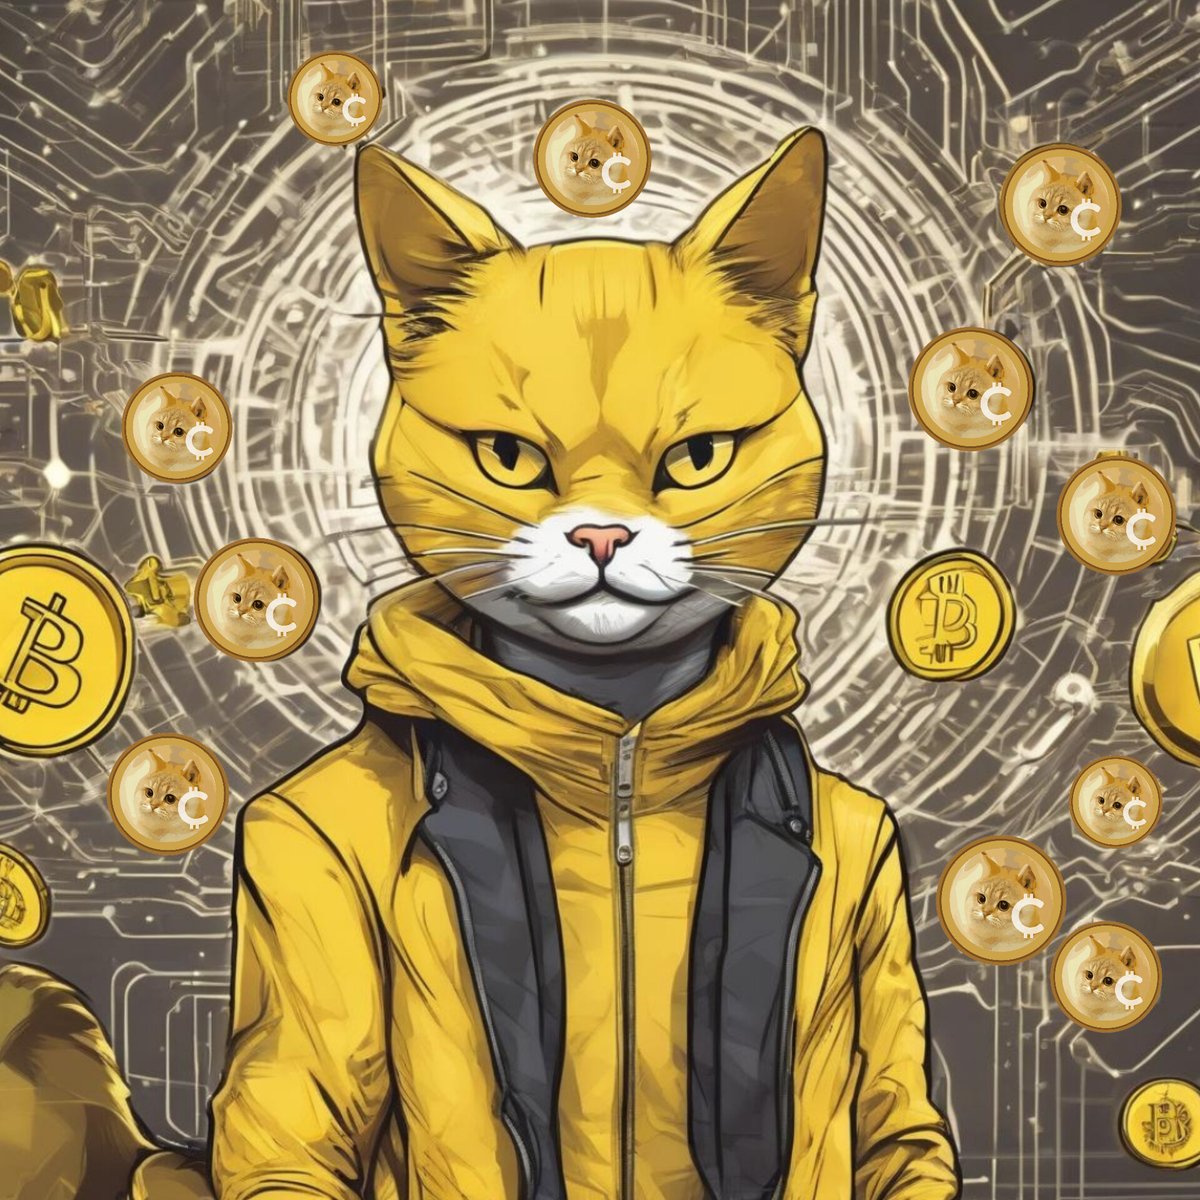 Soonish new Utility for $CAT 📈🚀

#CATARMY

@catcoin